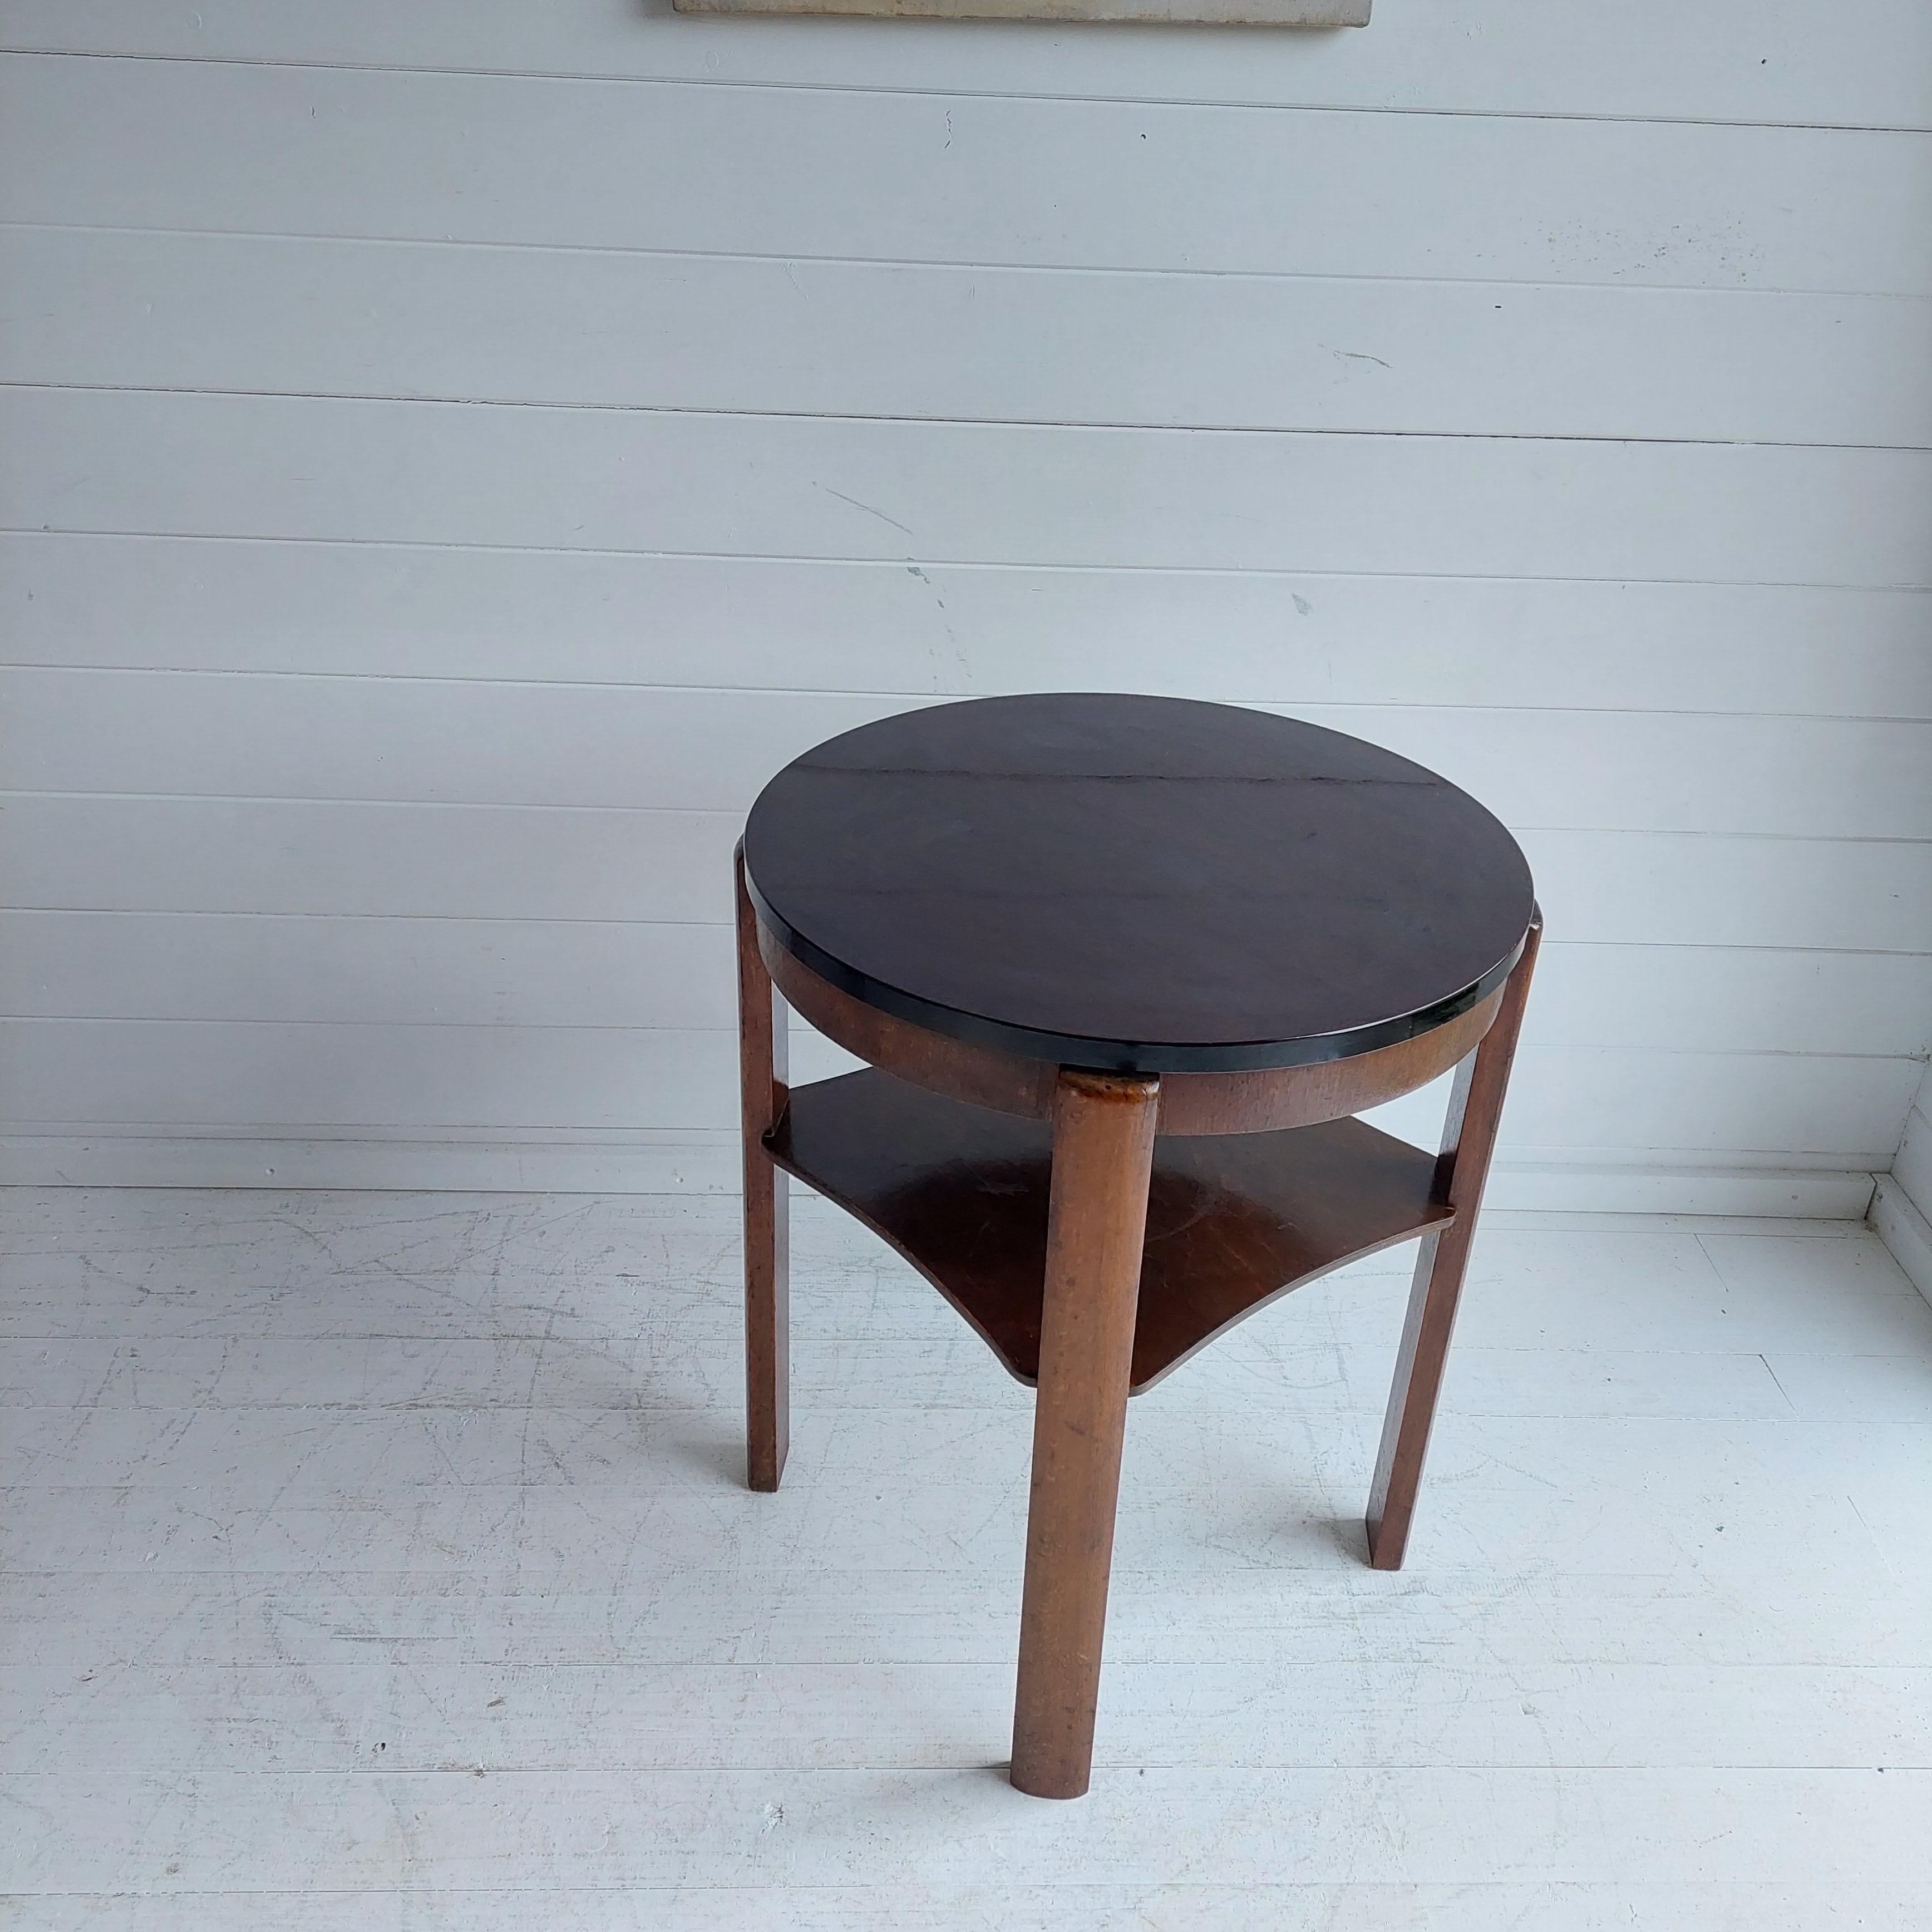 European Art Deco Round Gueridon side table in Laquered walnut and oak, Thonet Style 1930